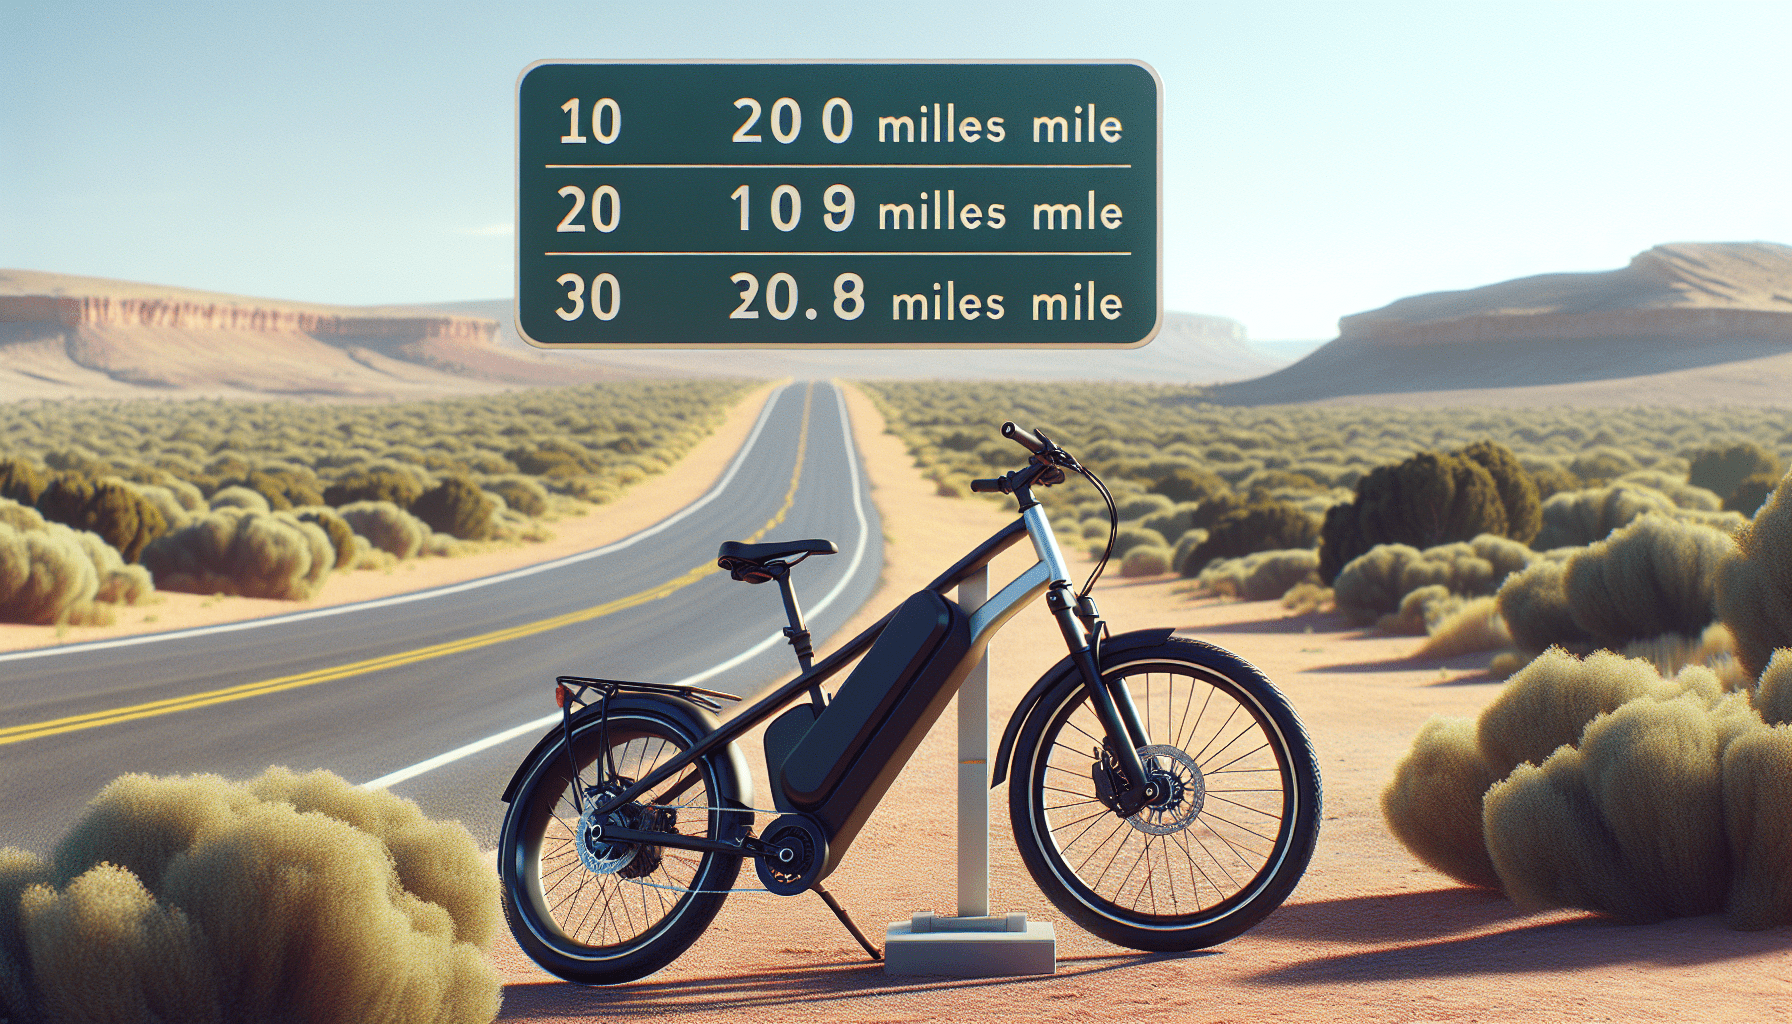 How Far Can An Electric Bike Go On One Charge?